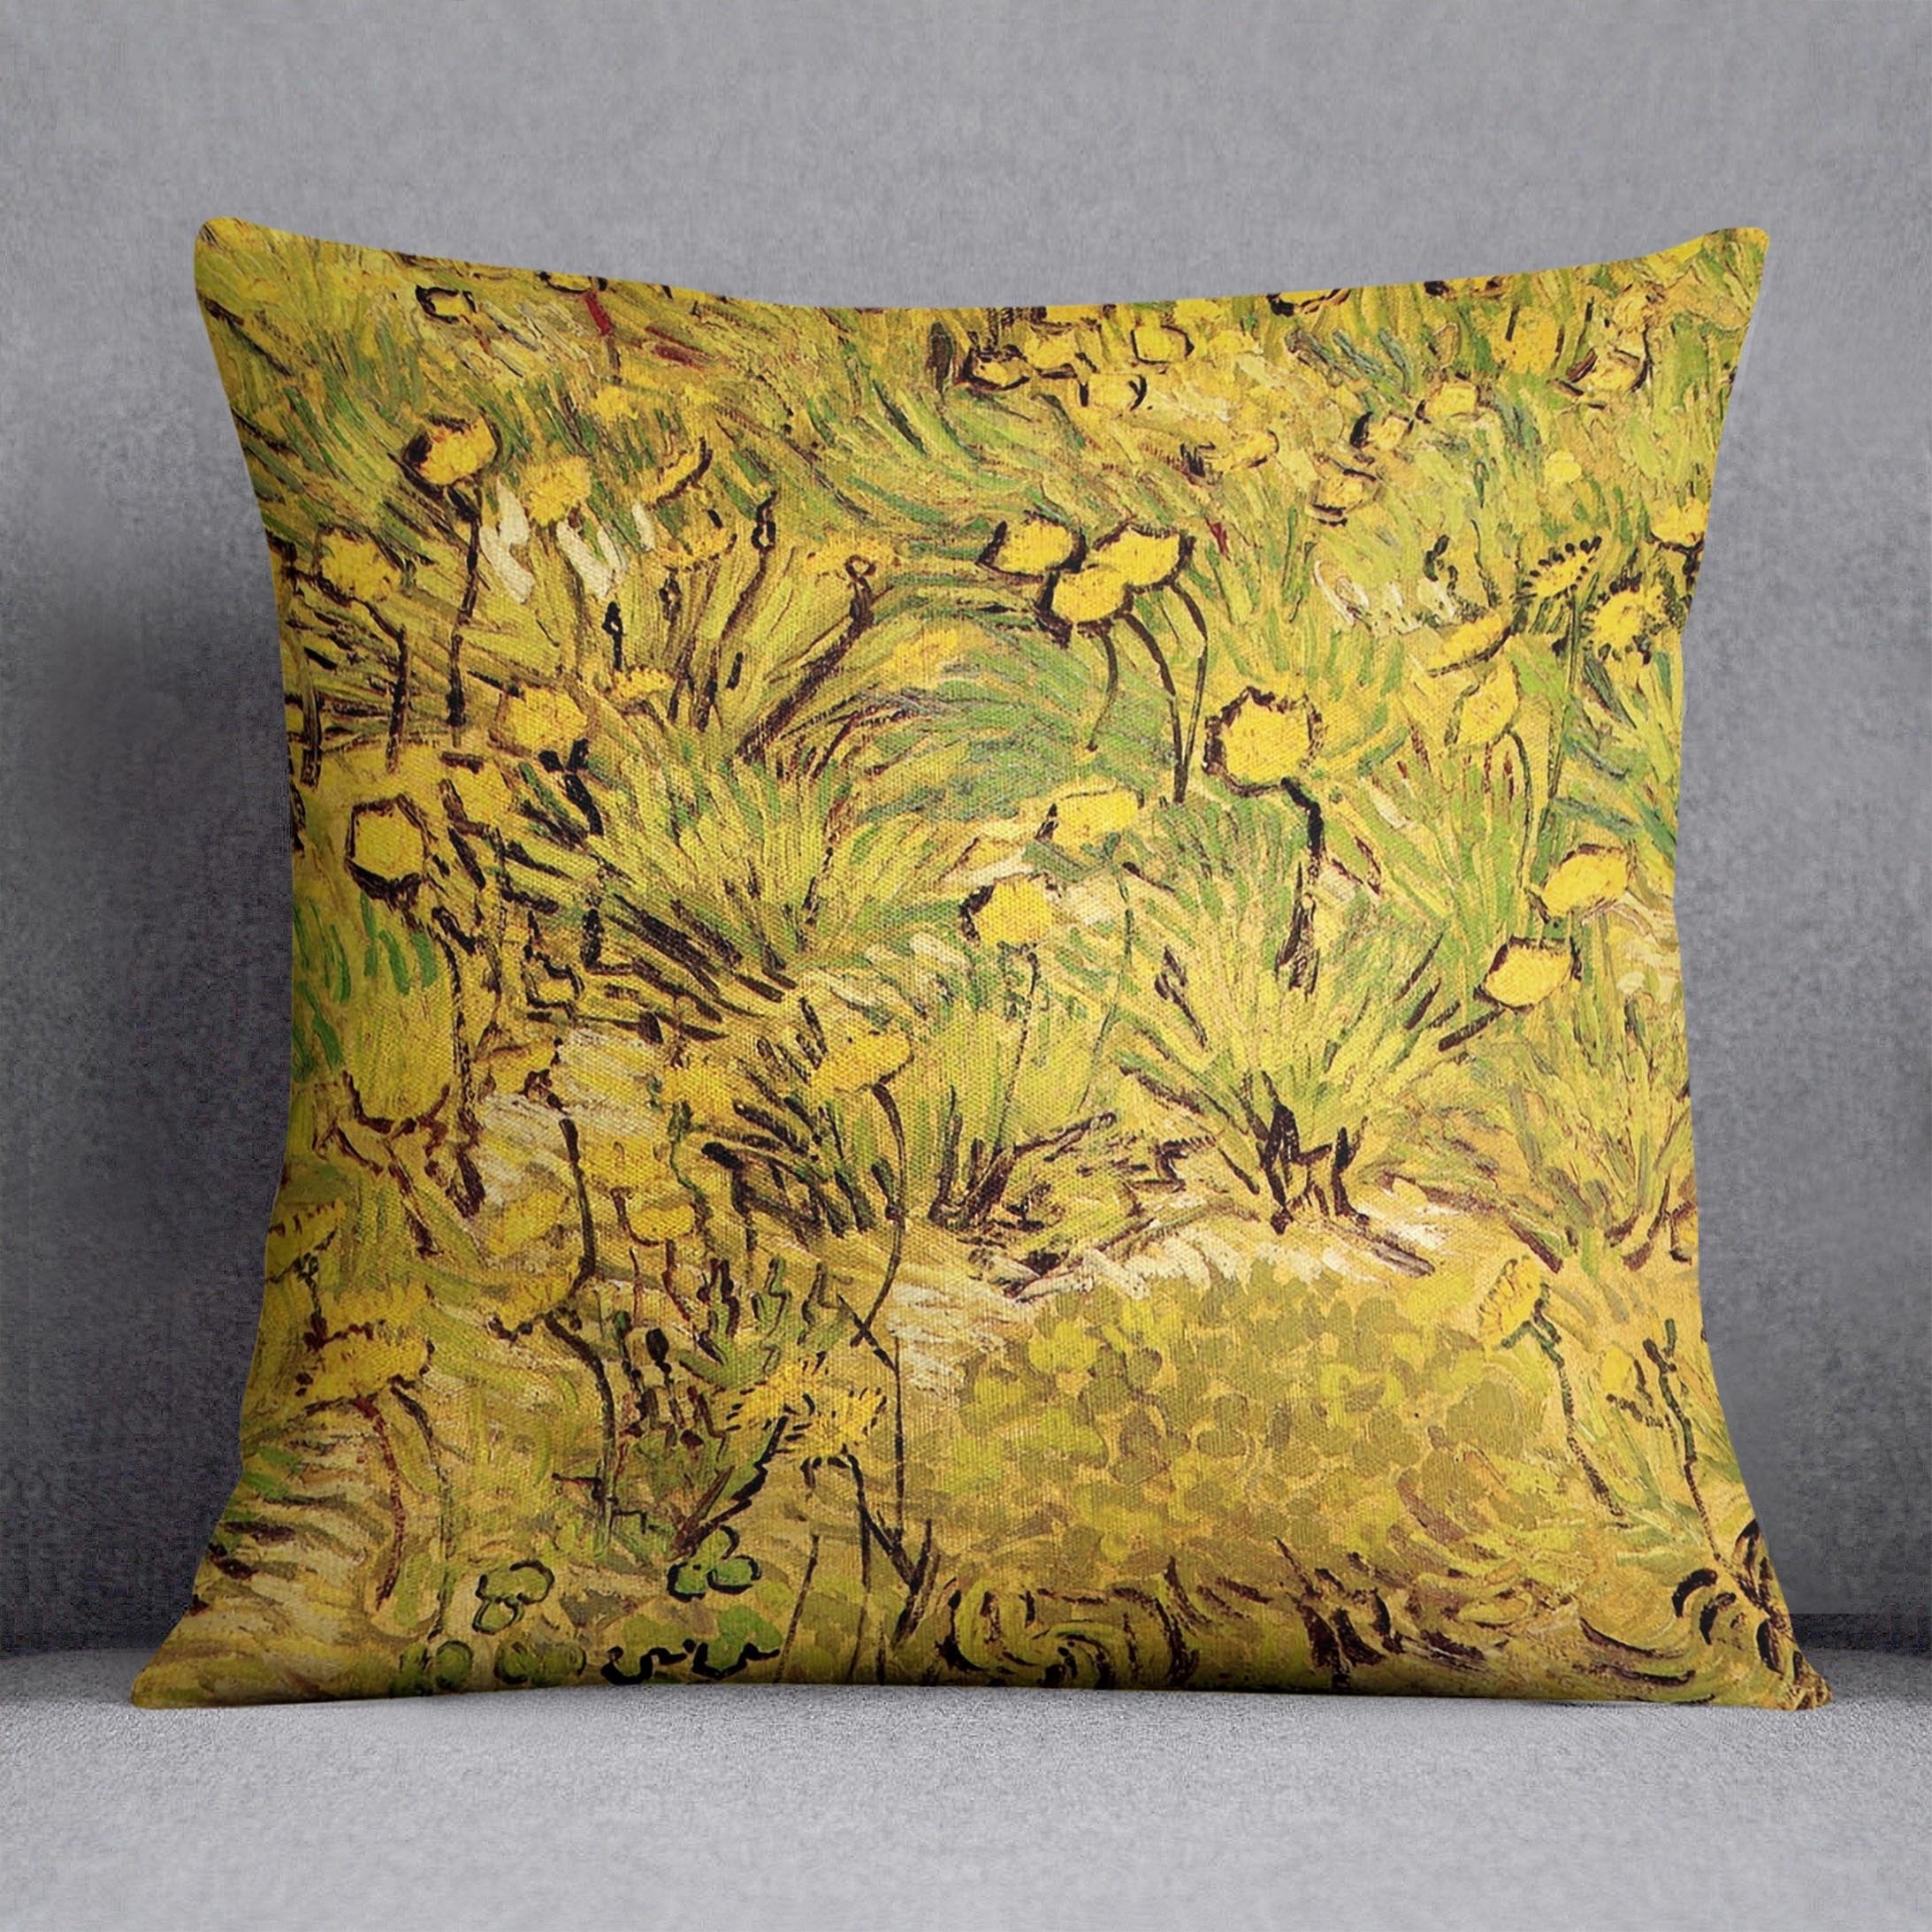 A Field of Yellow Flowers by Van Gogh Throw Pillow